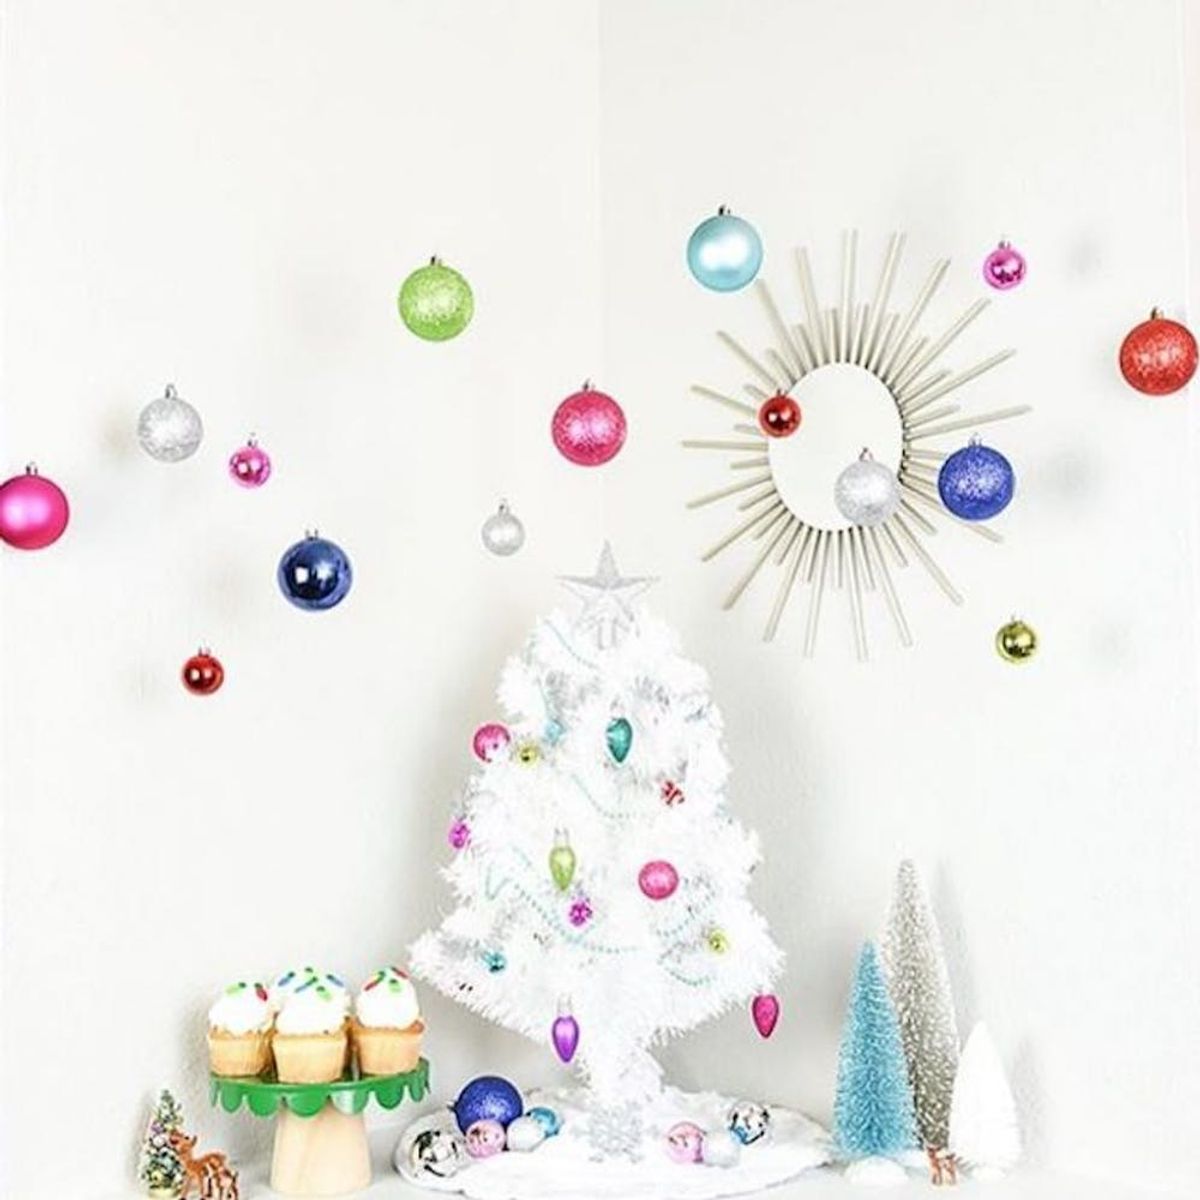 21 Instagram Accounts to Help You Dress Up Your Home for the Holidays